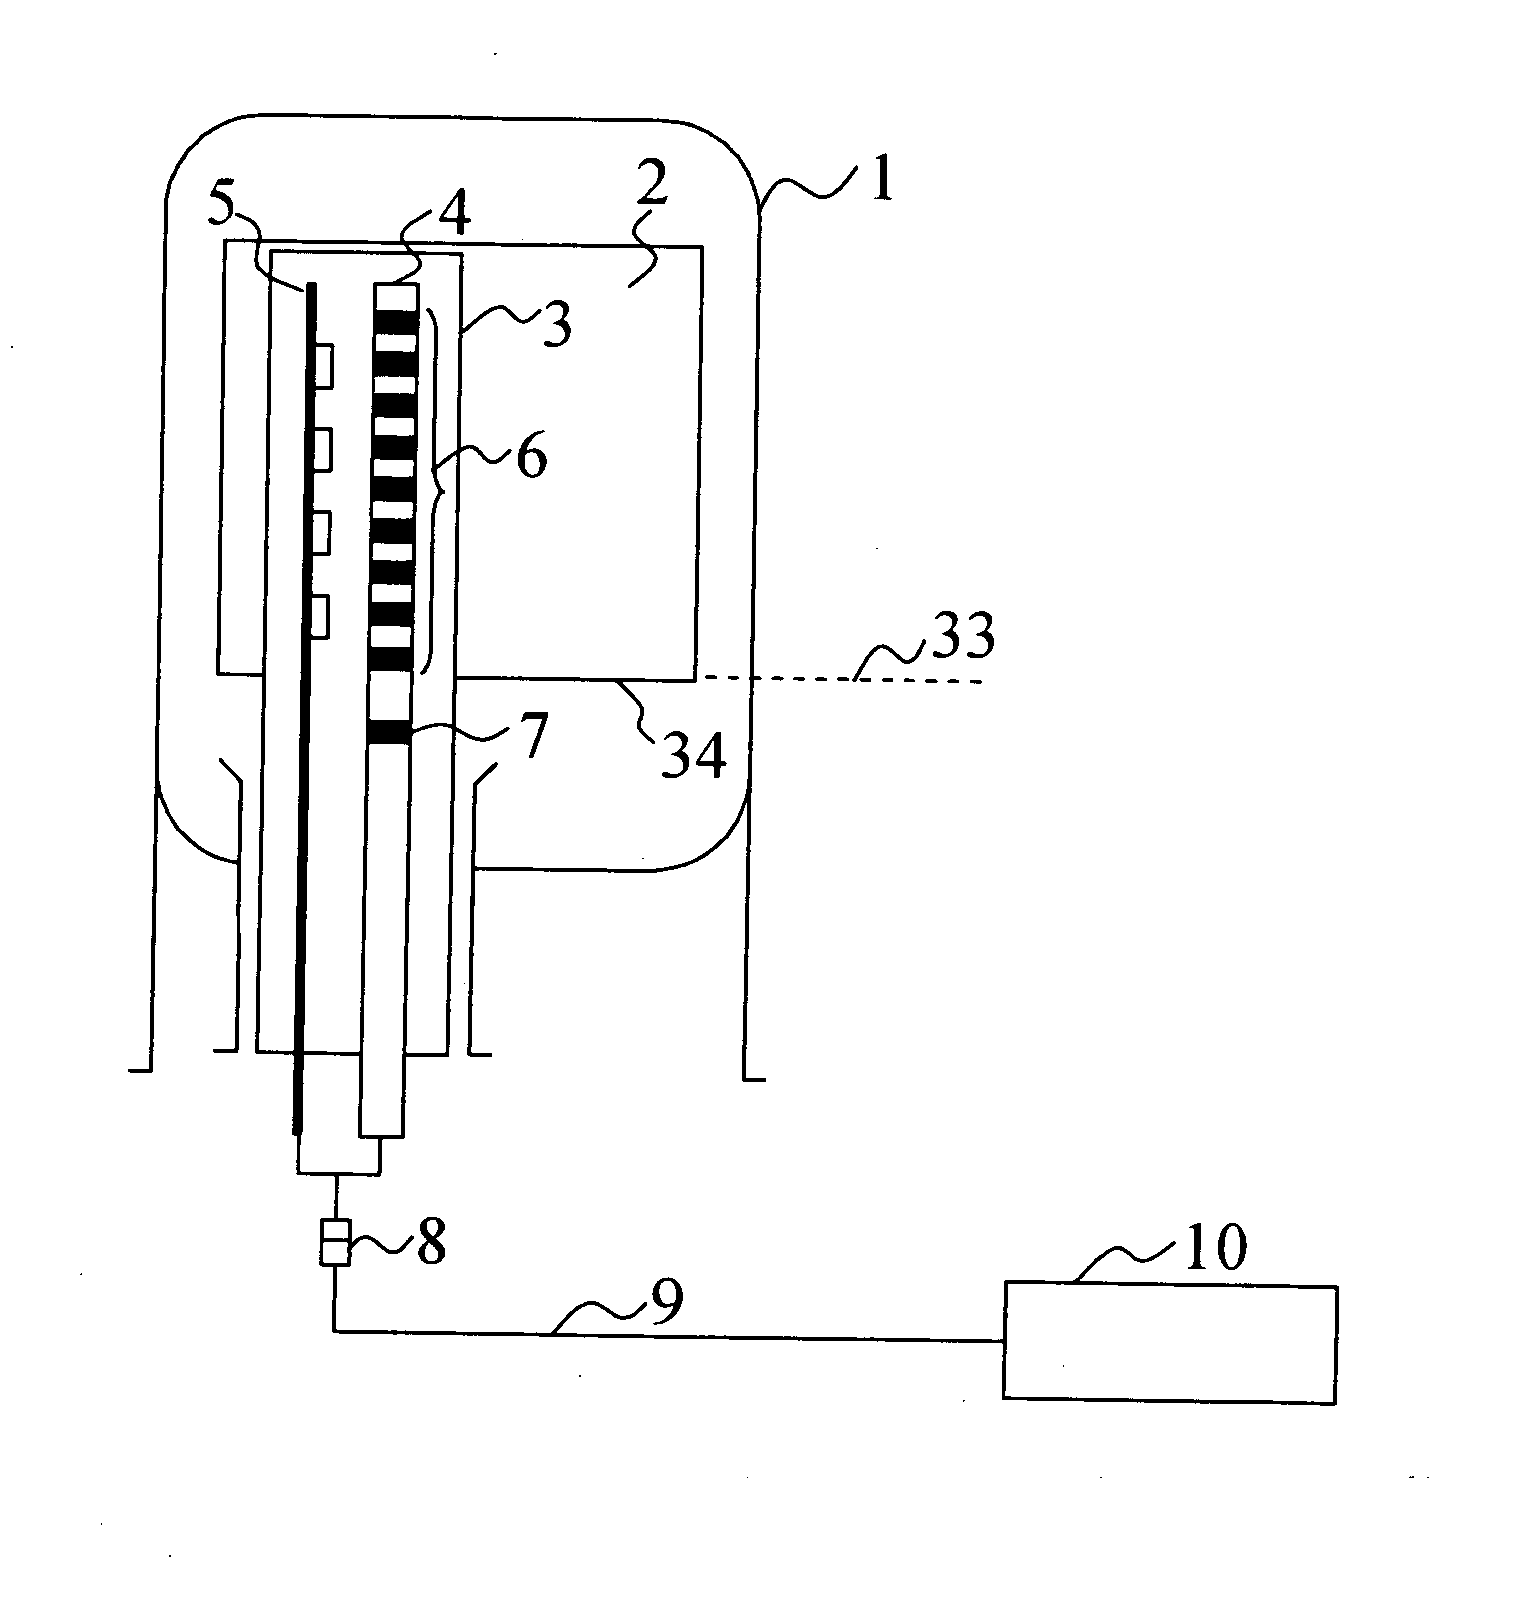 Apparatus and method for measuring a temperature of coolant in a reactor core, and apparatus for monitoring a reactor core